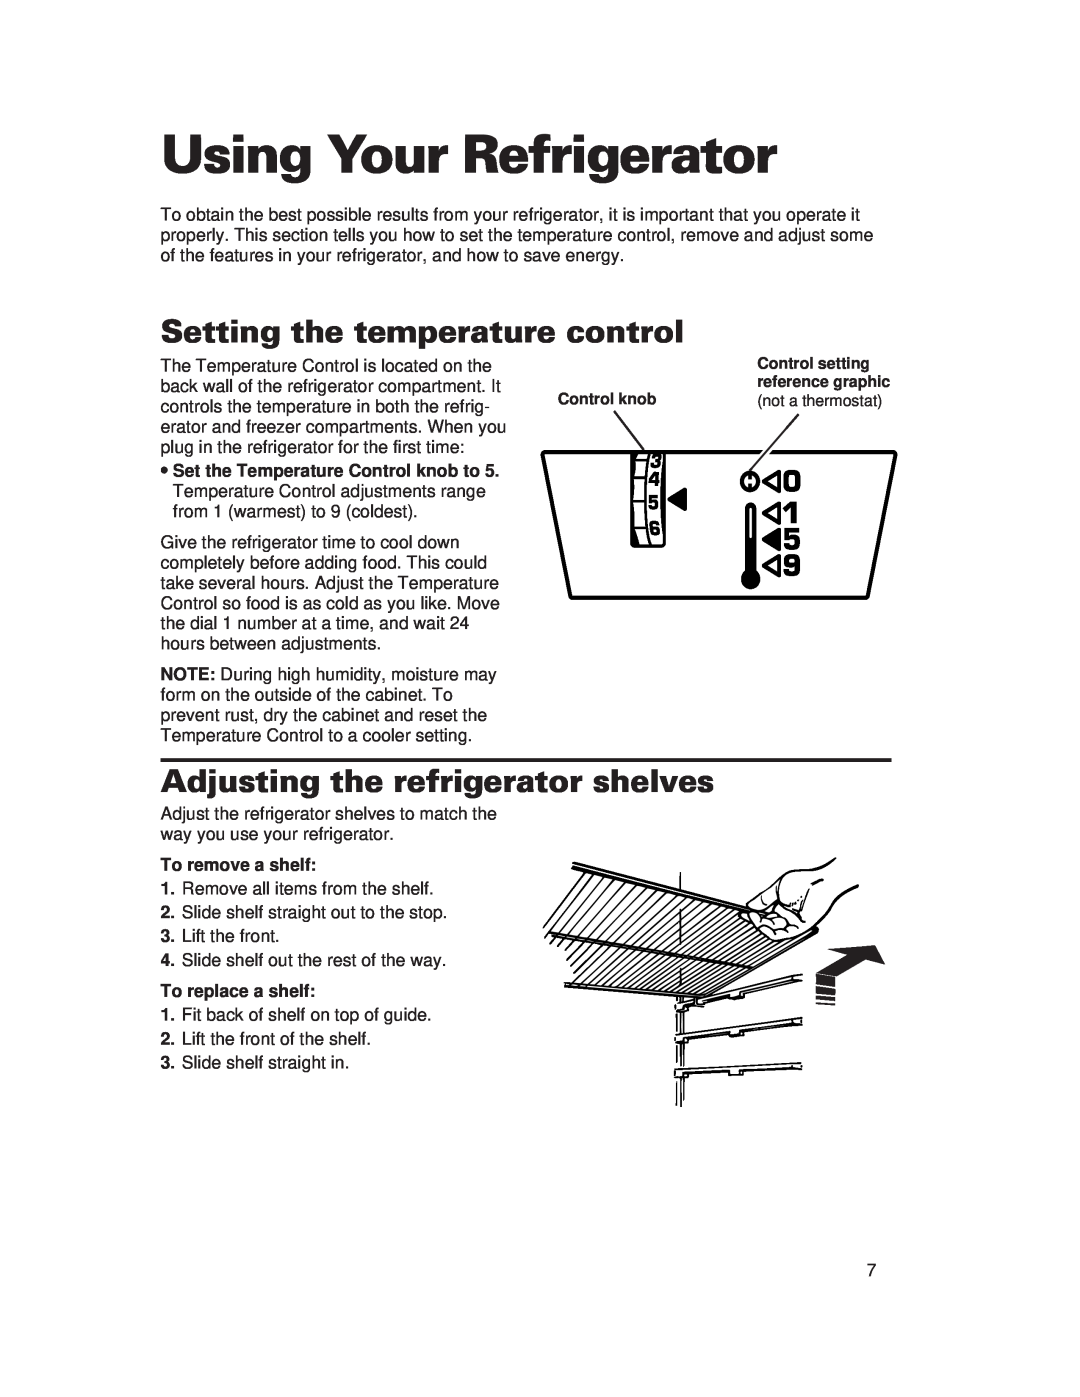 Whirlpool 1-34850/4390527 Using Your Refrigerator, Setting the temperature control, Adjusting the refrigerator shelves 